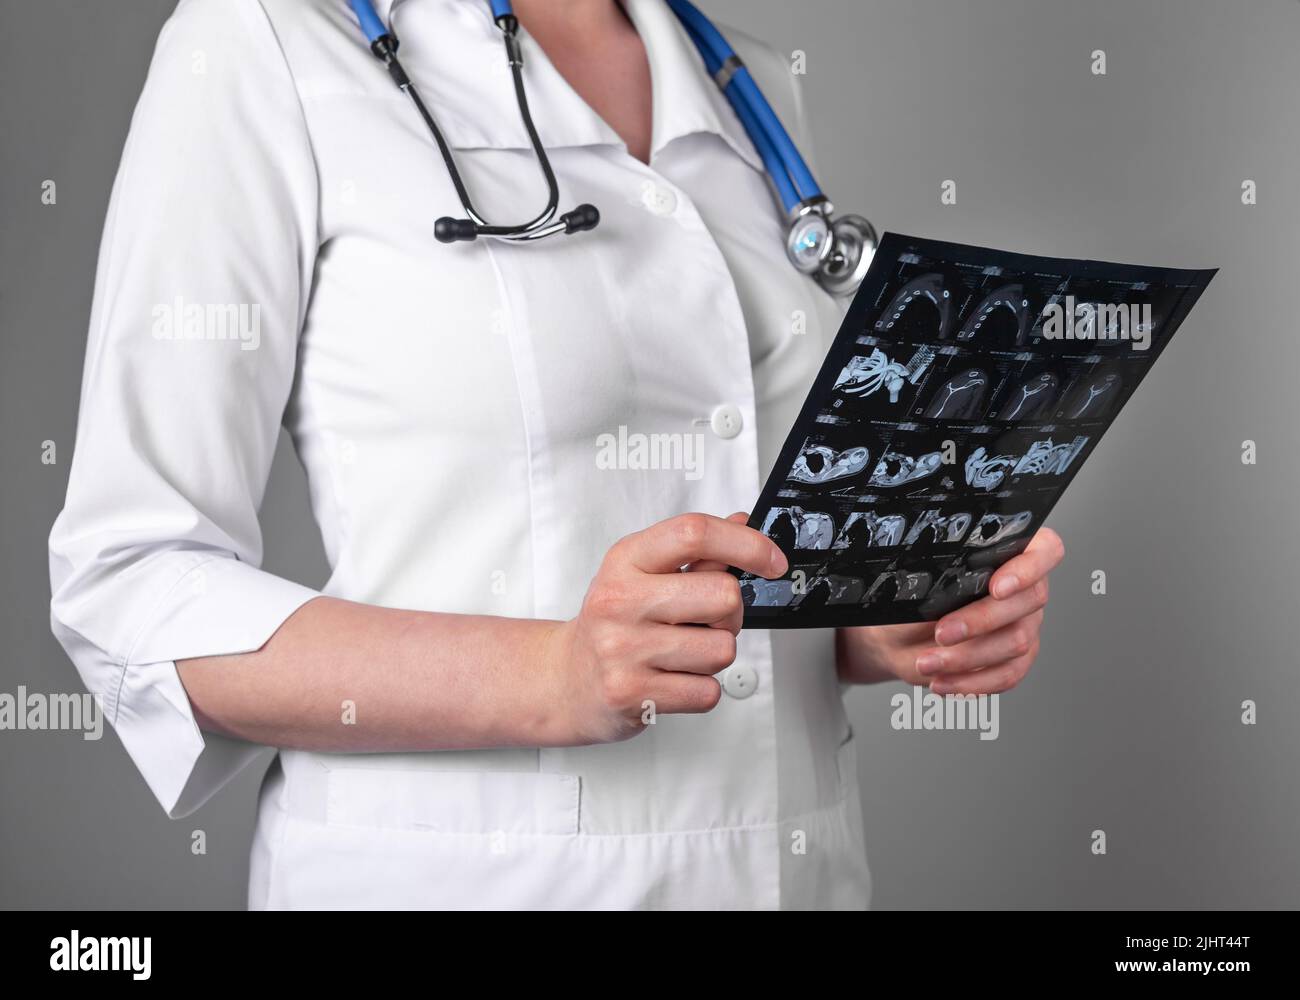 Doctor studying CT or MRI scan results. Diagnostics conducting for detecting diseases or injuries. Woman analyzing images of patient internal organs. Health care, medicine concept. High quality photo Stock Photo